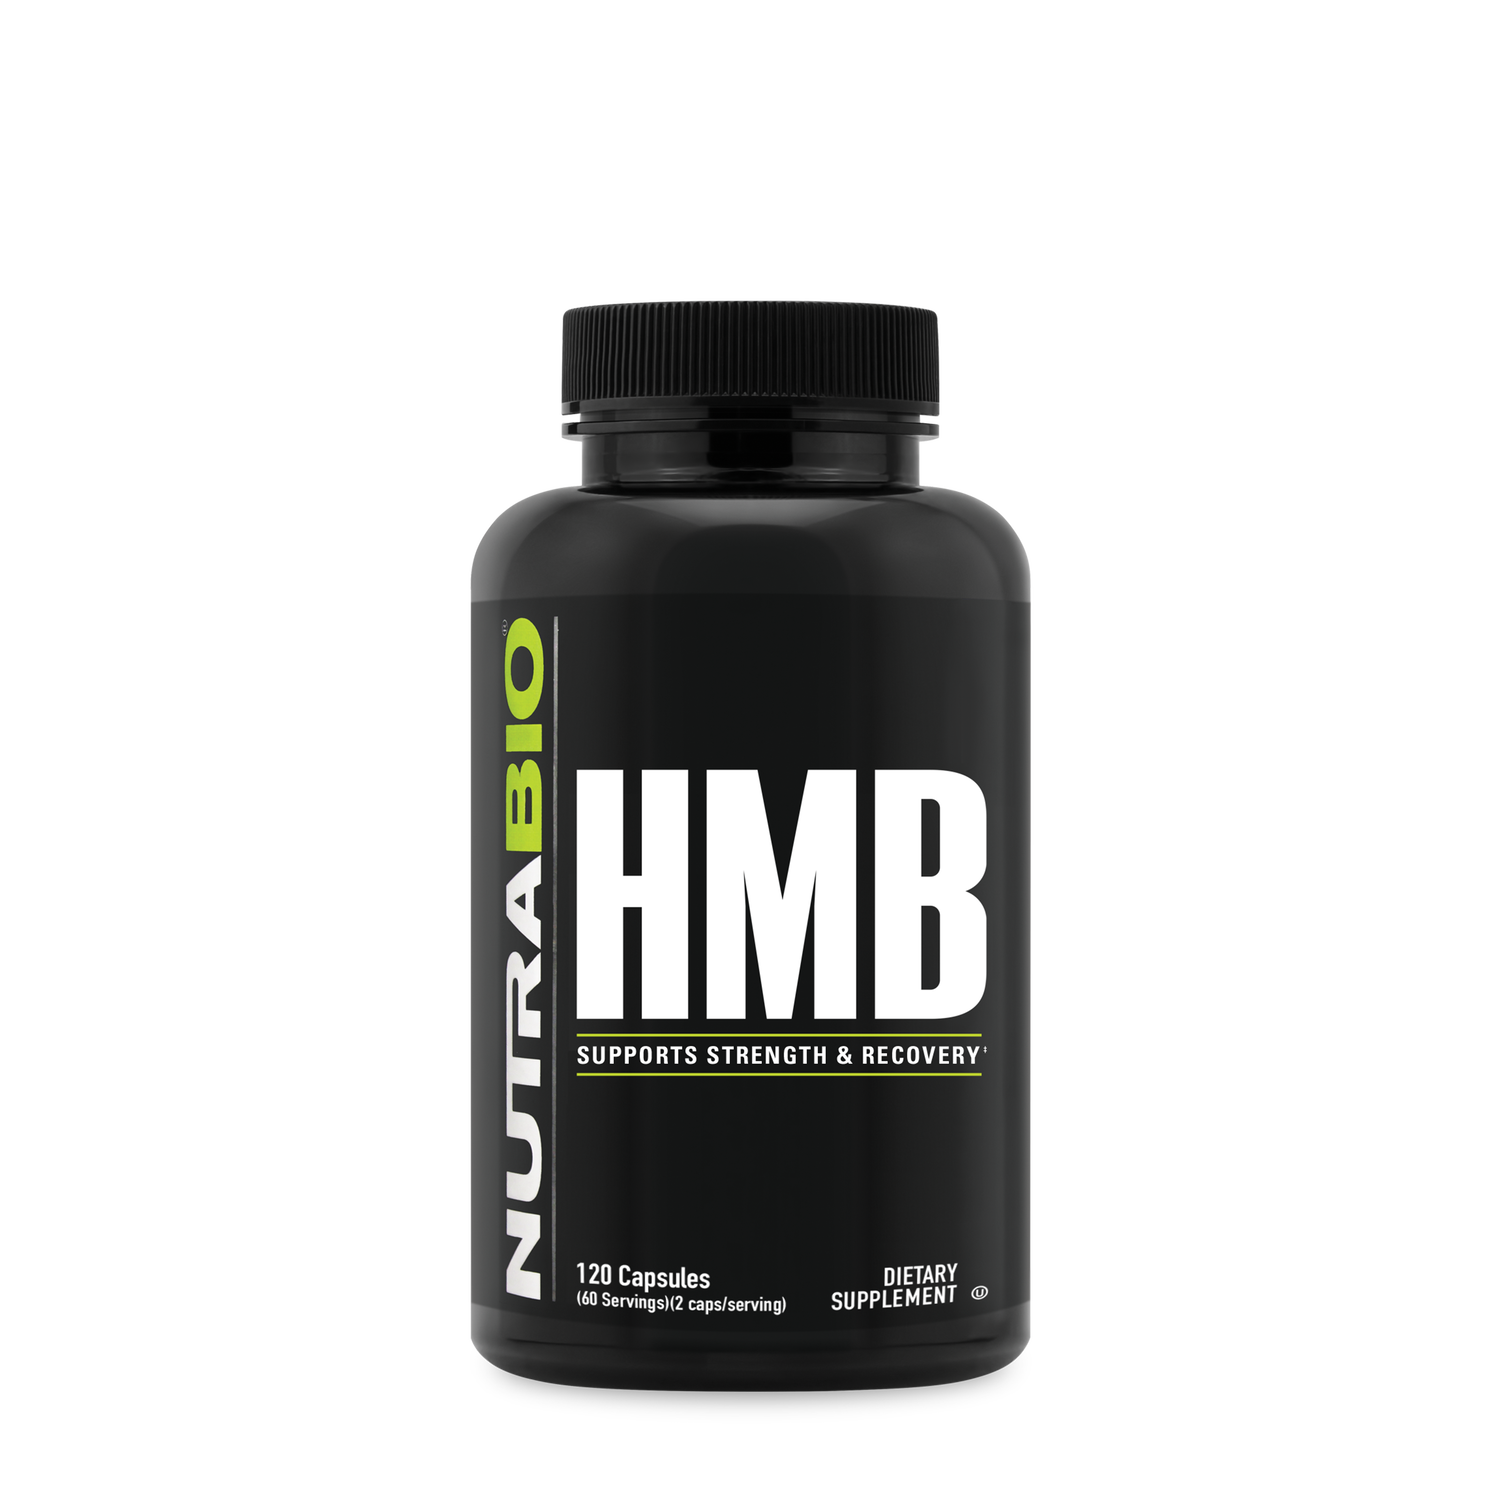 NutraBio Hmb Strength & Recovery Support - 120 Capsules (60 Servings)